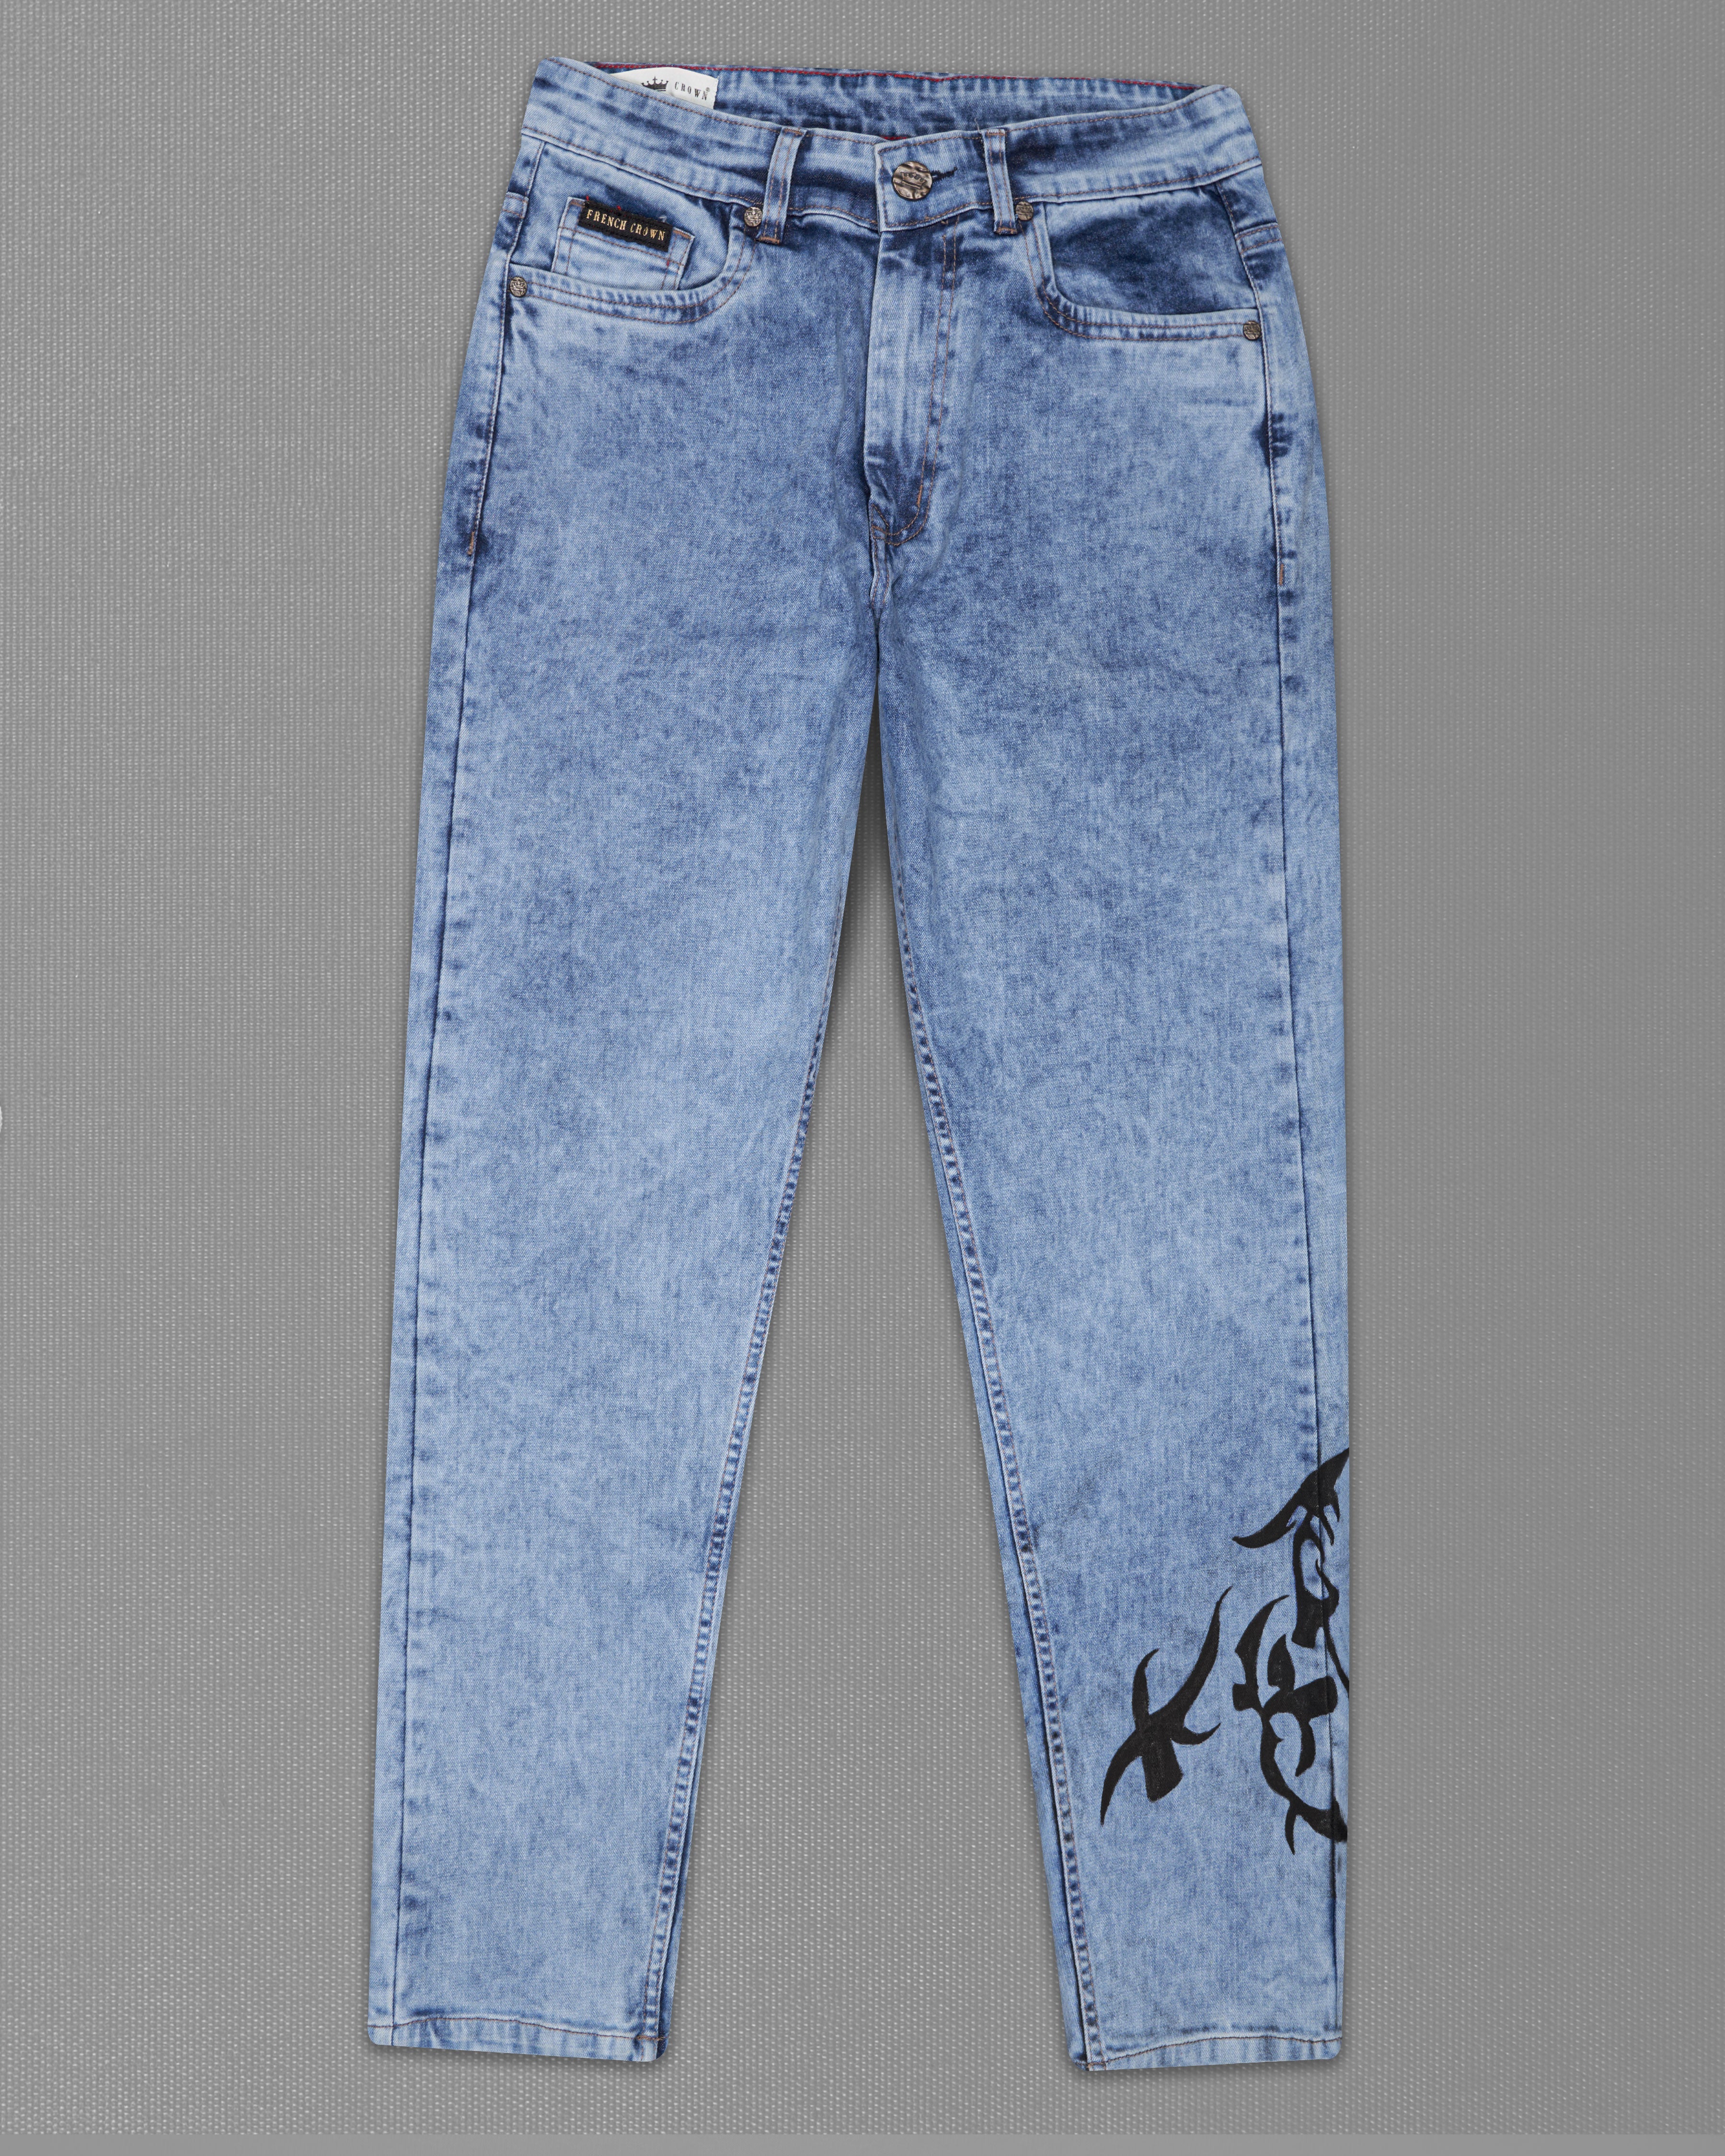 Ship Cove Blue Stone Wash Hand Painted Stretchable Denim J147-ART-30, J147-ART-32, J147-ART-34, J147-ART-36, J147-ART-38, J147-ART-40